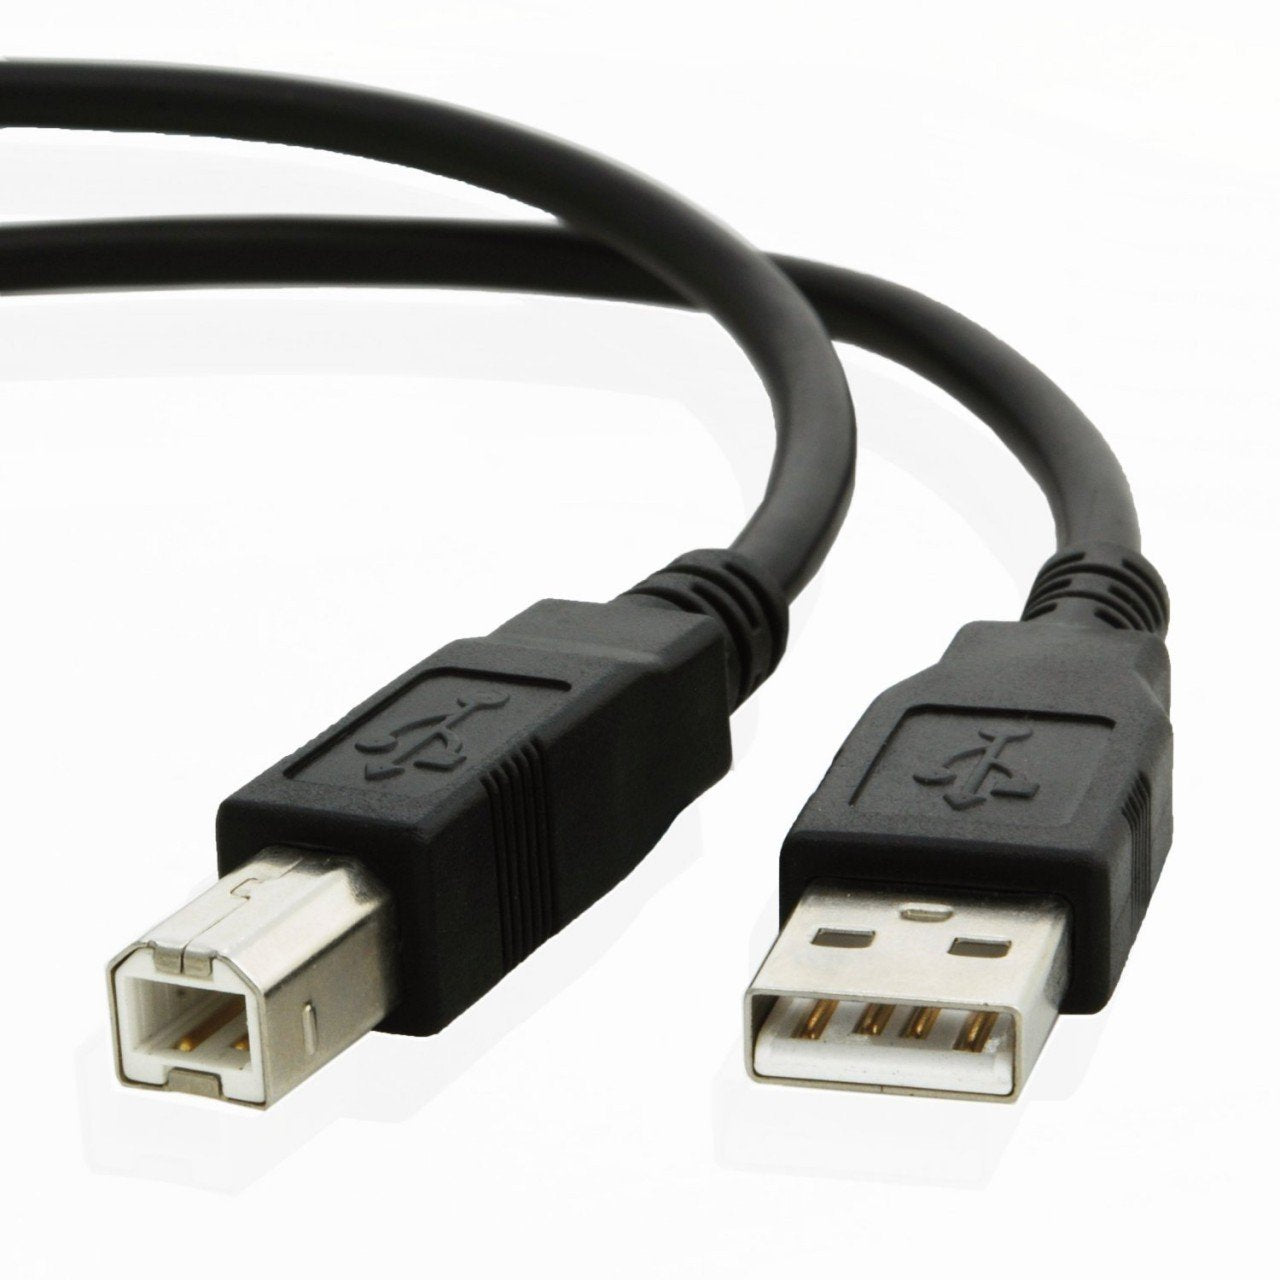 USB cable for Hp LASERJET PRO M102w